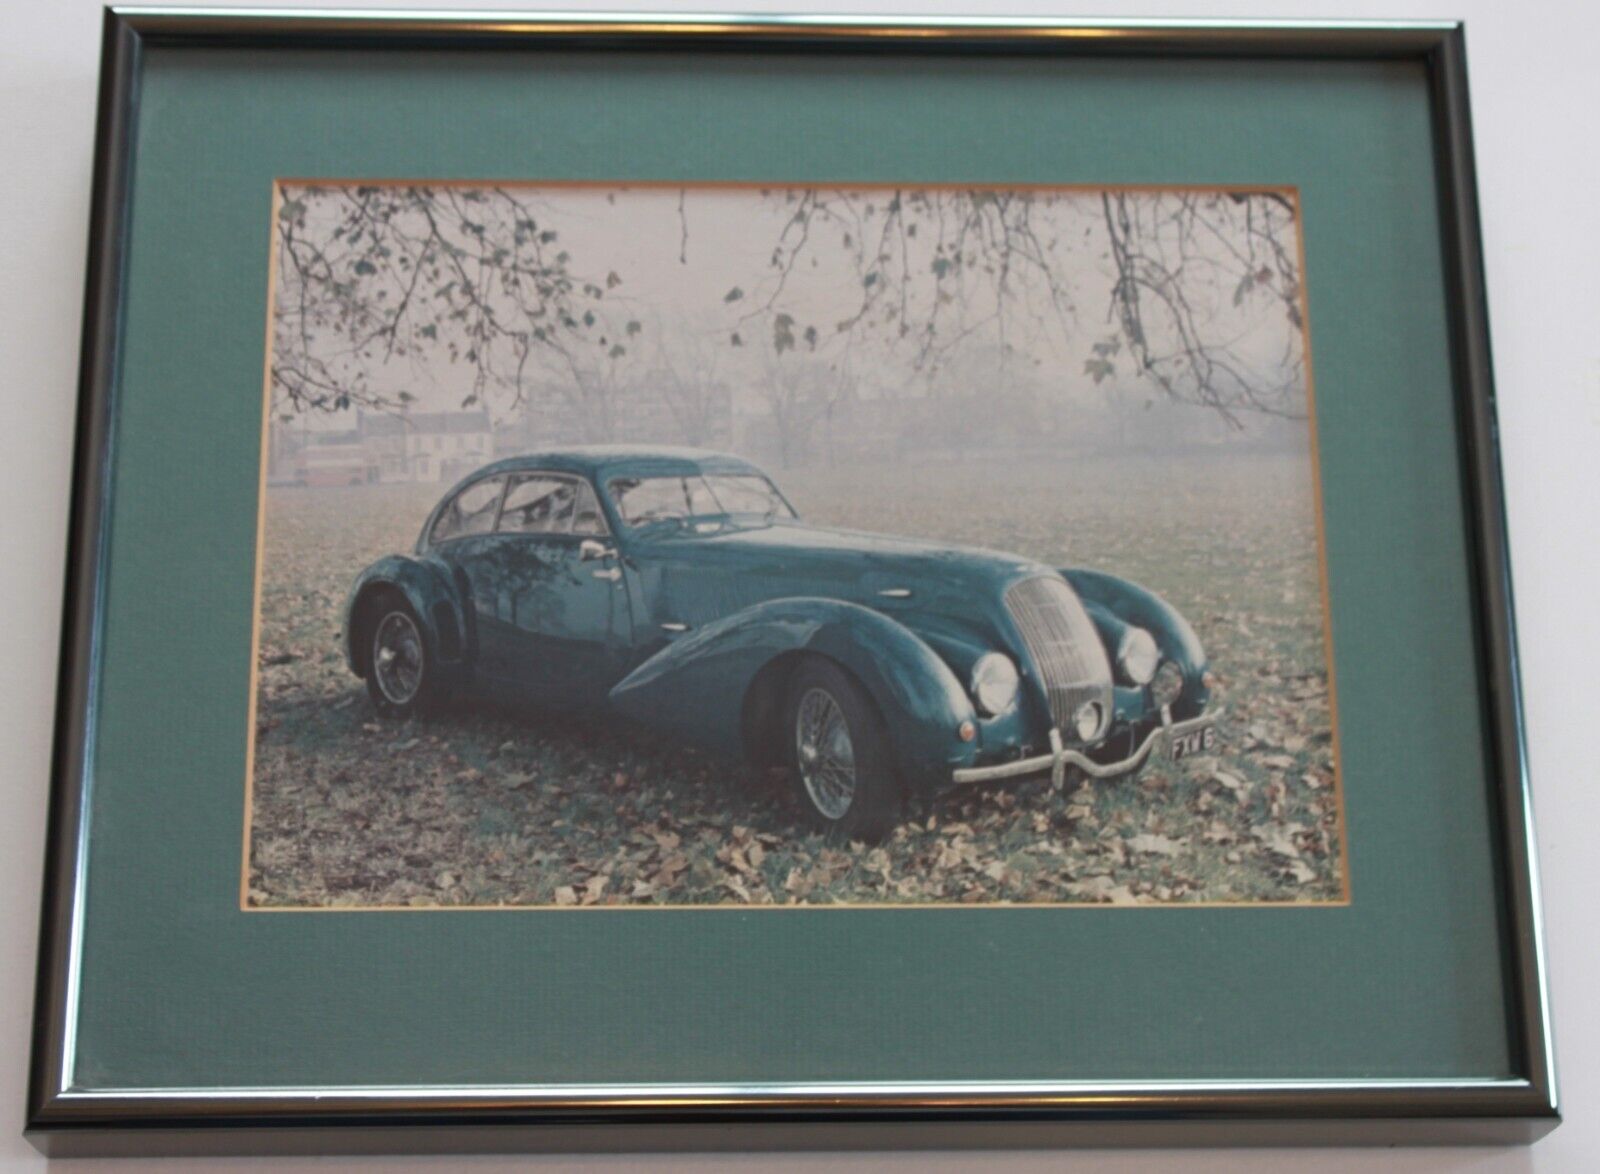 Framed picture of a \'38 Bentley Embiricos Pualin from AUTO Quarterly, lot 115